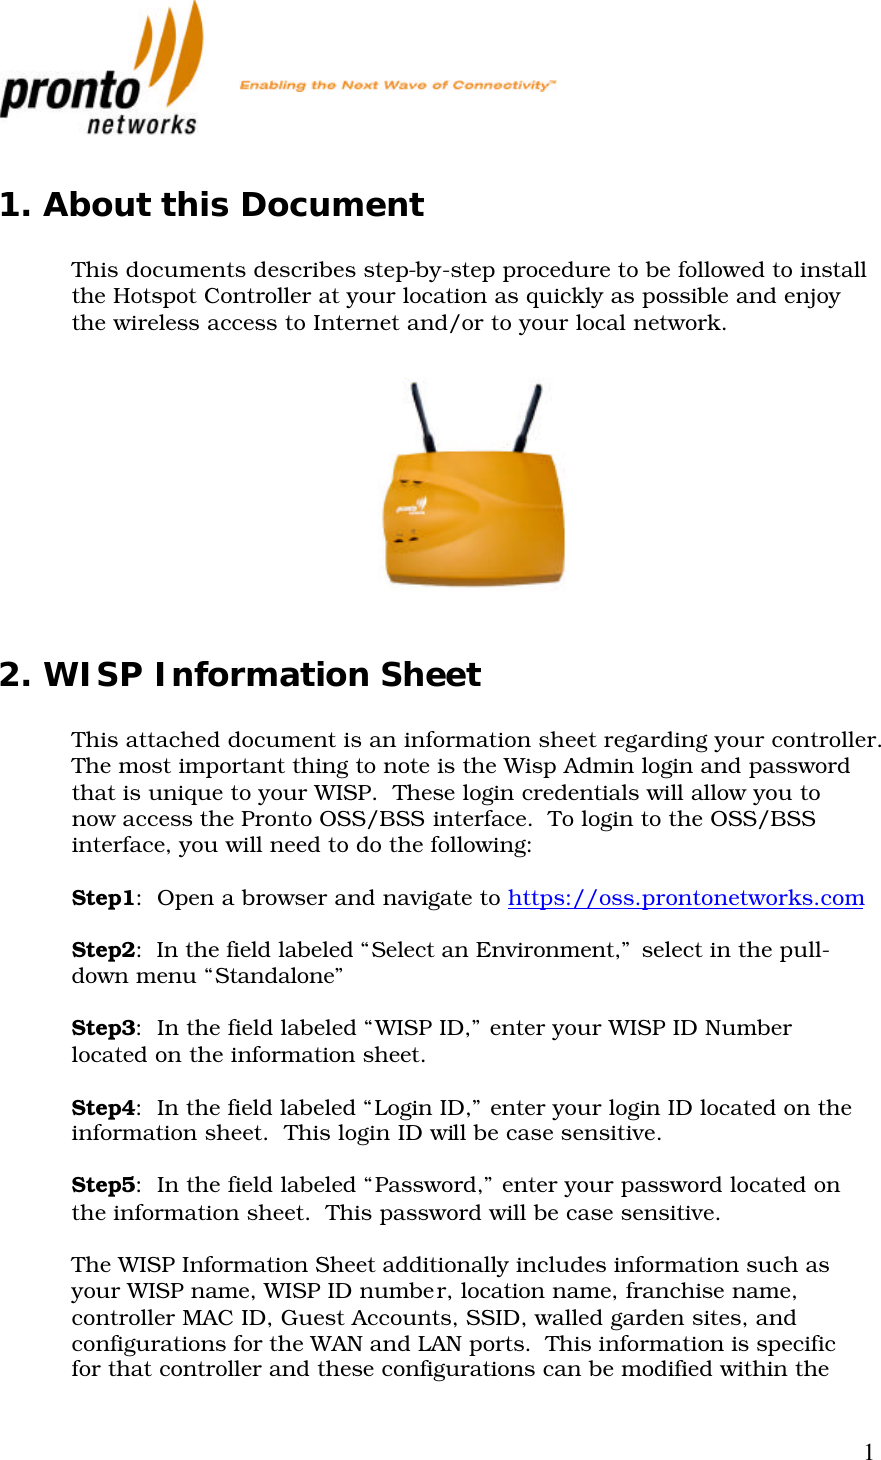           1 1. About this Document  This documents describes step-by-step procedure to be followed to install the Hotspot Controller at your location as quickly as possible and enjoy the wireless access to Internet and/or to your local network.    2. WISP Information Sheet    This attached document is an information sheet regarding your controller.  The most important thing to note is the Wisp Admin login and password that is unique to your WISP.  These login credentials will allow you to now access the Pronto OSS/BSS interface.  To login to the OSS/BSS interface, you will need to do the following:  Step1:  Open a browser and navigate to https://oss.prontonetworks.com  Step2:  In the field labeled “Select an Environment,” select in the pull-down menu “Standalone”  Step3:  In the field labeled “WISP ID,” enter your WISP ID Number located on the information sheet.  Step4:  In the field labeled “Login ID,” enter your login ID located on the information sheet.  This login ID will be case sensitive.  Step5:  In the field labeled “Password,” enter your password located on the information sheet.  This password will be case sensitive.  The WISP Information Sheet additionally includes information such as your WISP name, WISP ID number, location name, franchise name, controller MAC ID, Guest Accounts, SSID, walled garden sites, and configurations for the WAN and LAN ports.  This information is specific for that controller and these configurations can be modified within the 